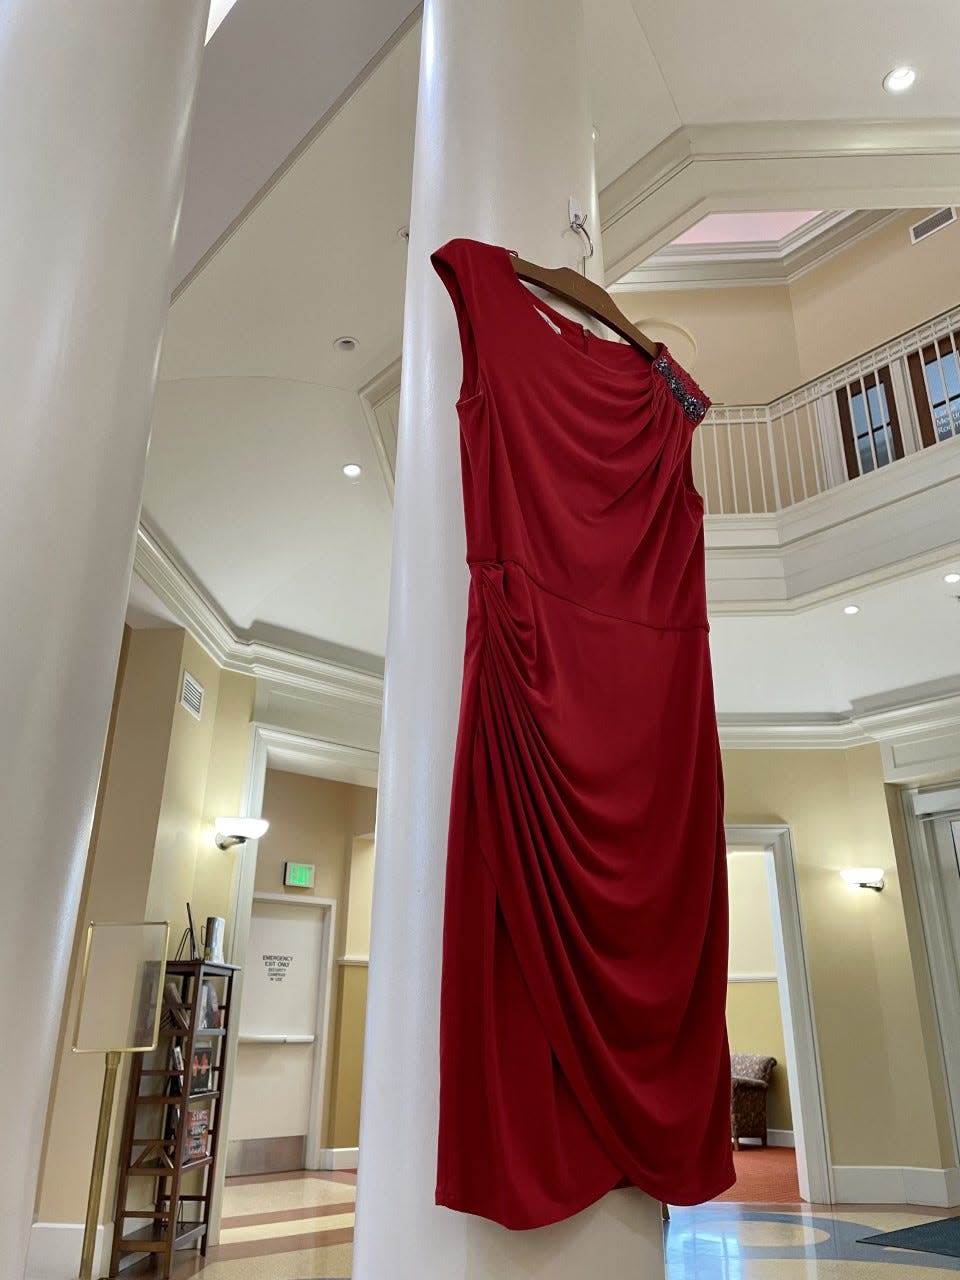 The Zonta Club of Petoskey Area will participate in the 16 Days of Activism against Gender-Based Violence Campaign with a red dress display at the Petoskey District Library.